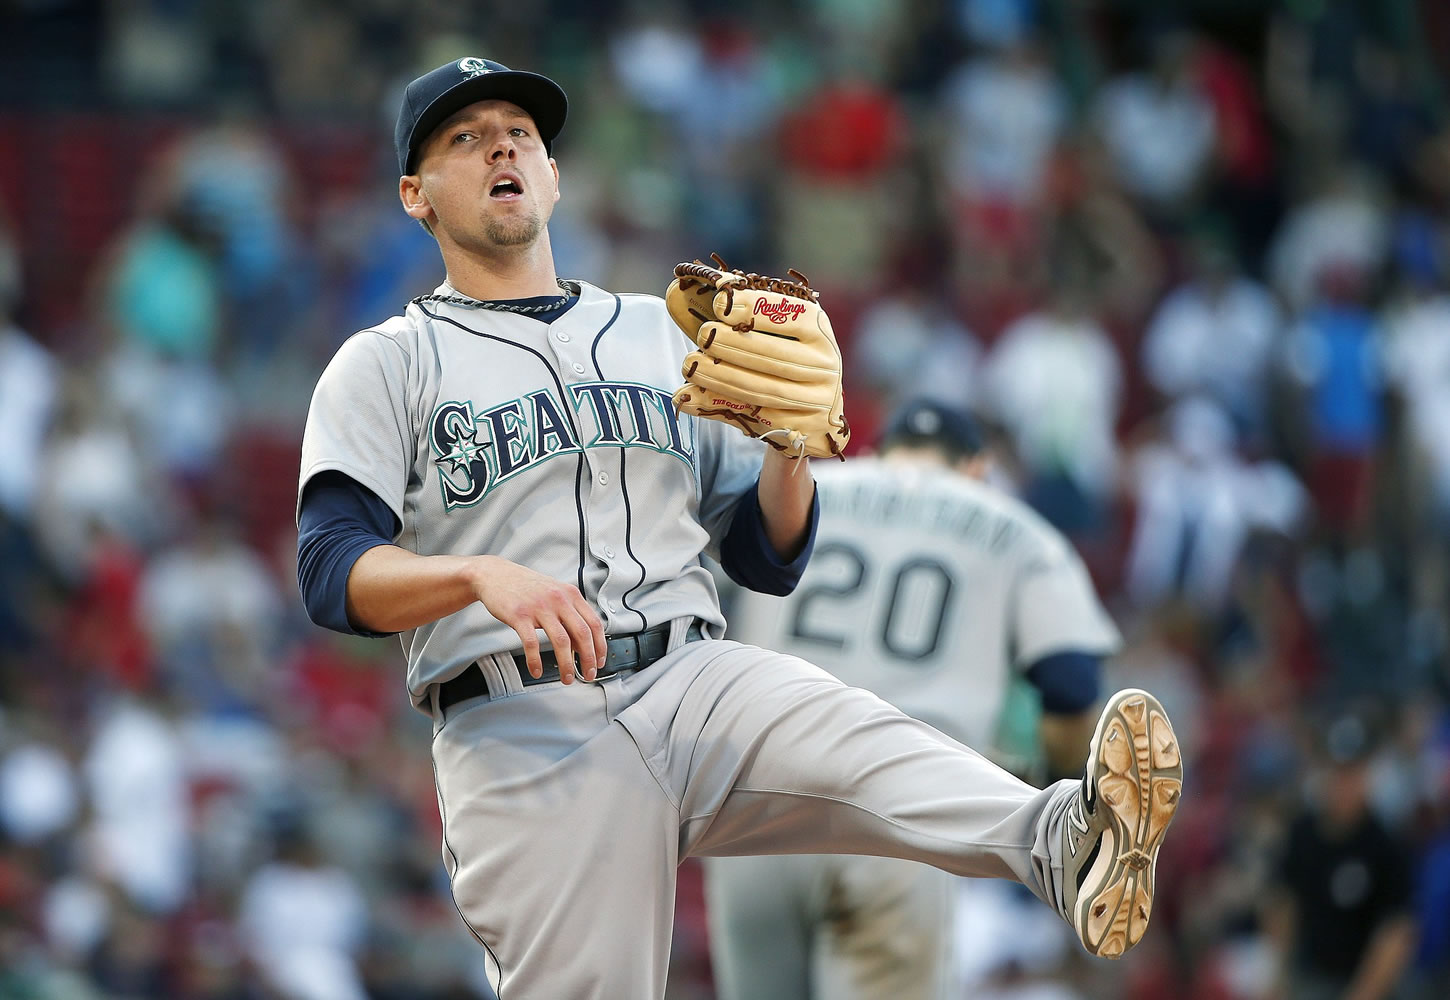 Seattle Mariners' Danny Farquhar reacts after making the ground out on Boston Red Sox's Jackie Bradley Jr. to end the game in the 12th inning Sunday.